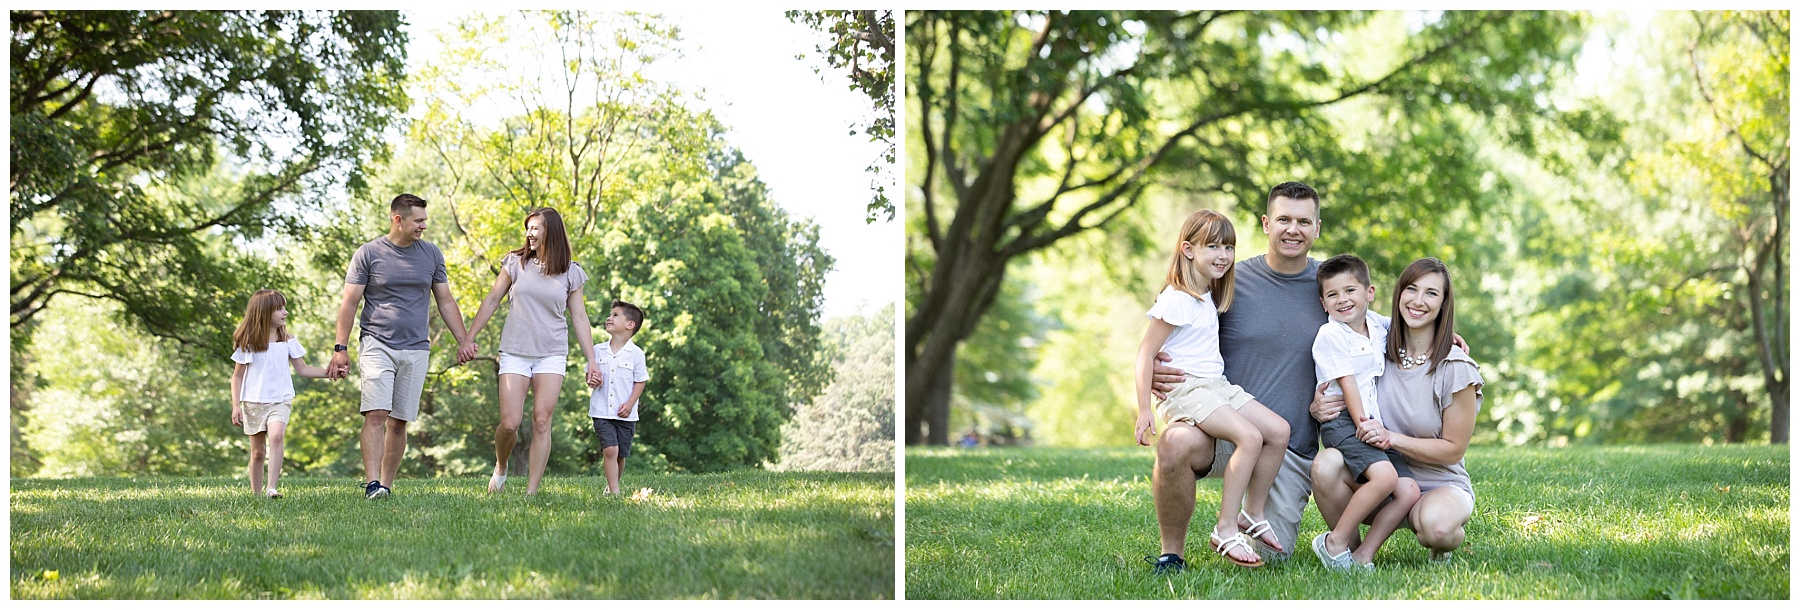 loose park family photo session with simply grace photography